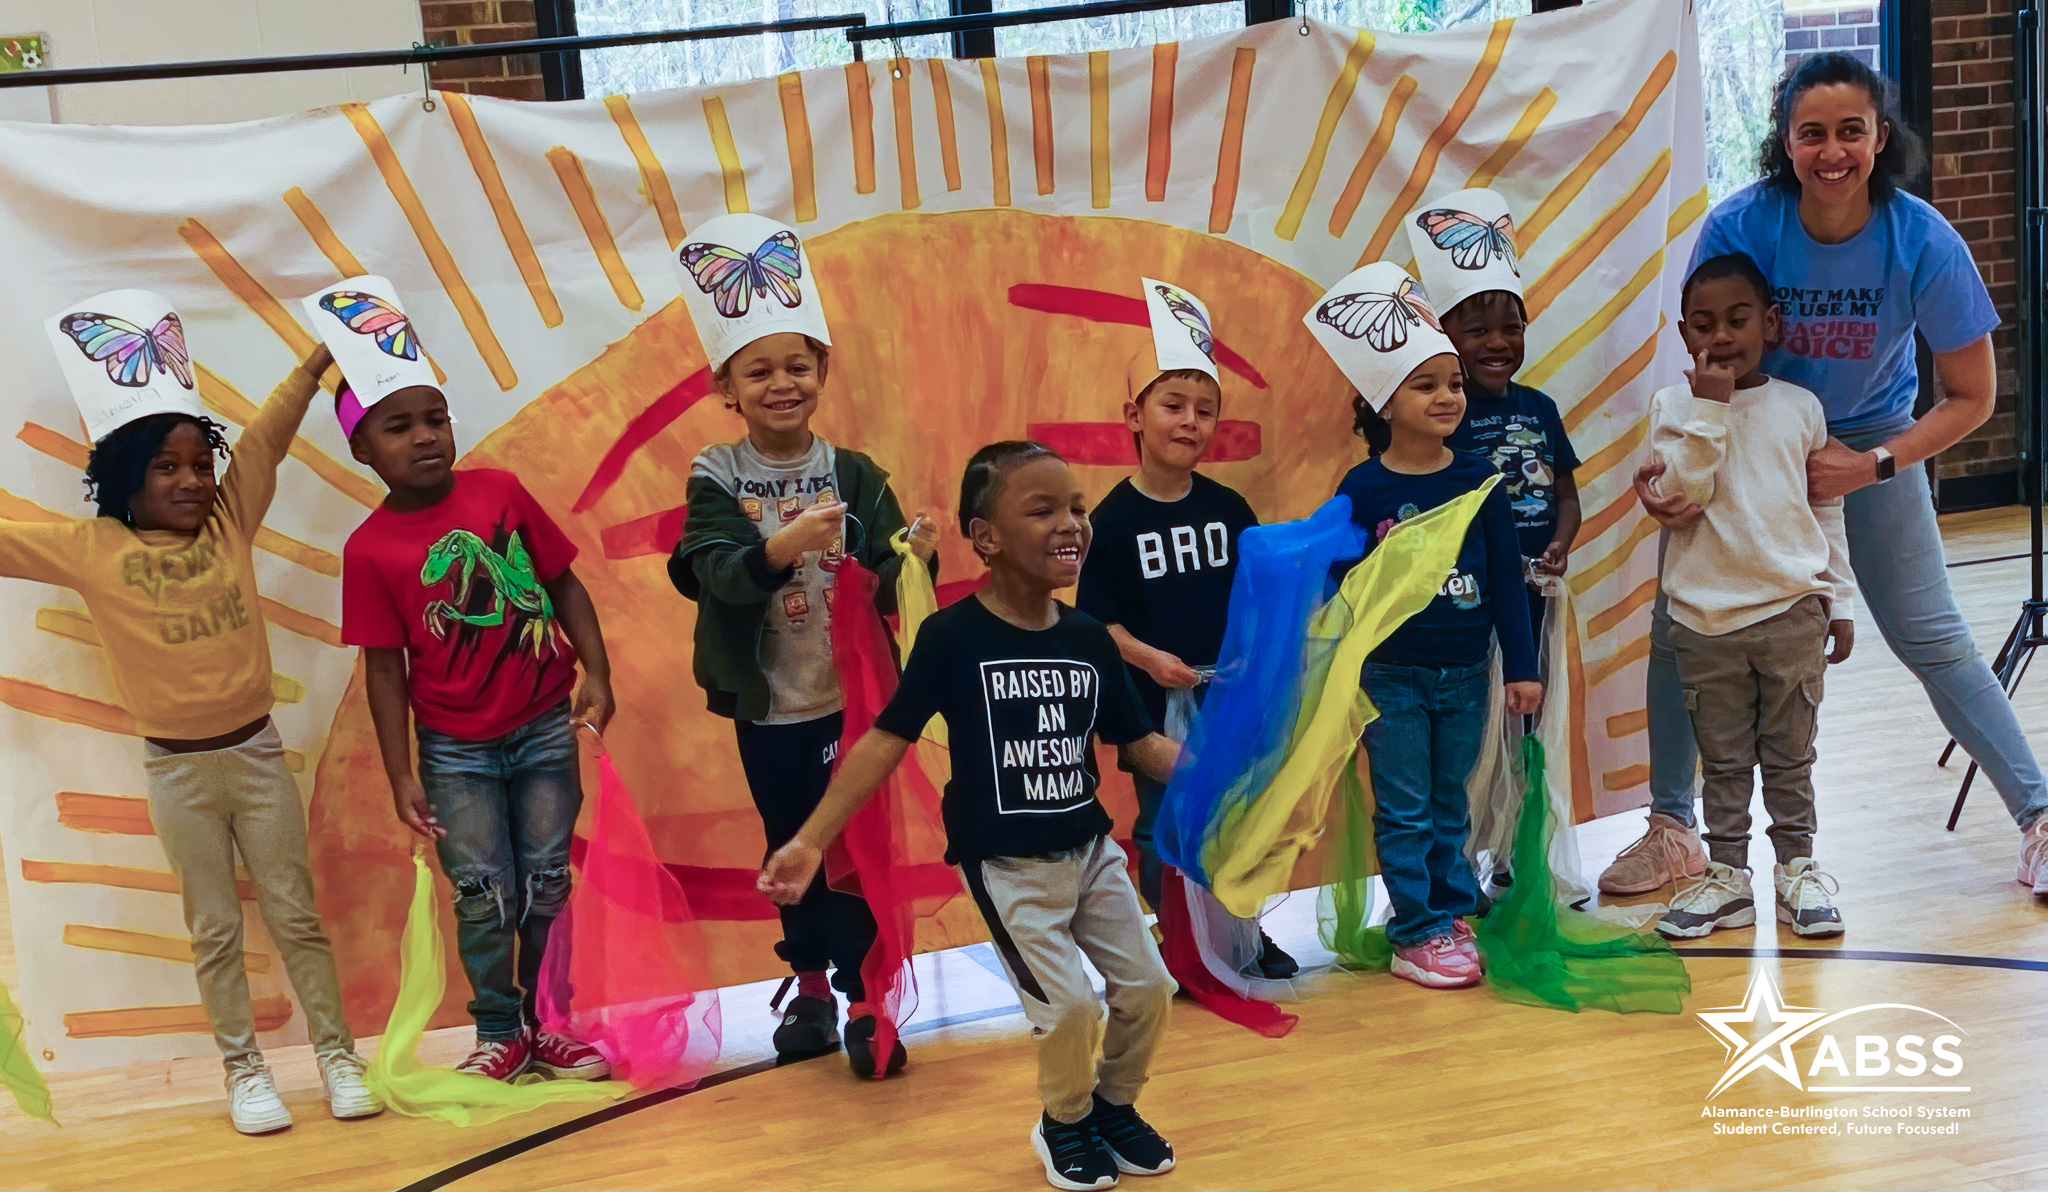 Pre-Kindergarten students standing in front of a larger painted sun during a school play